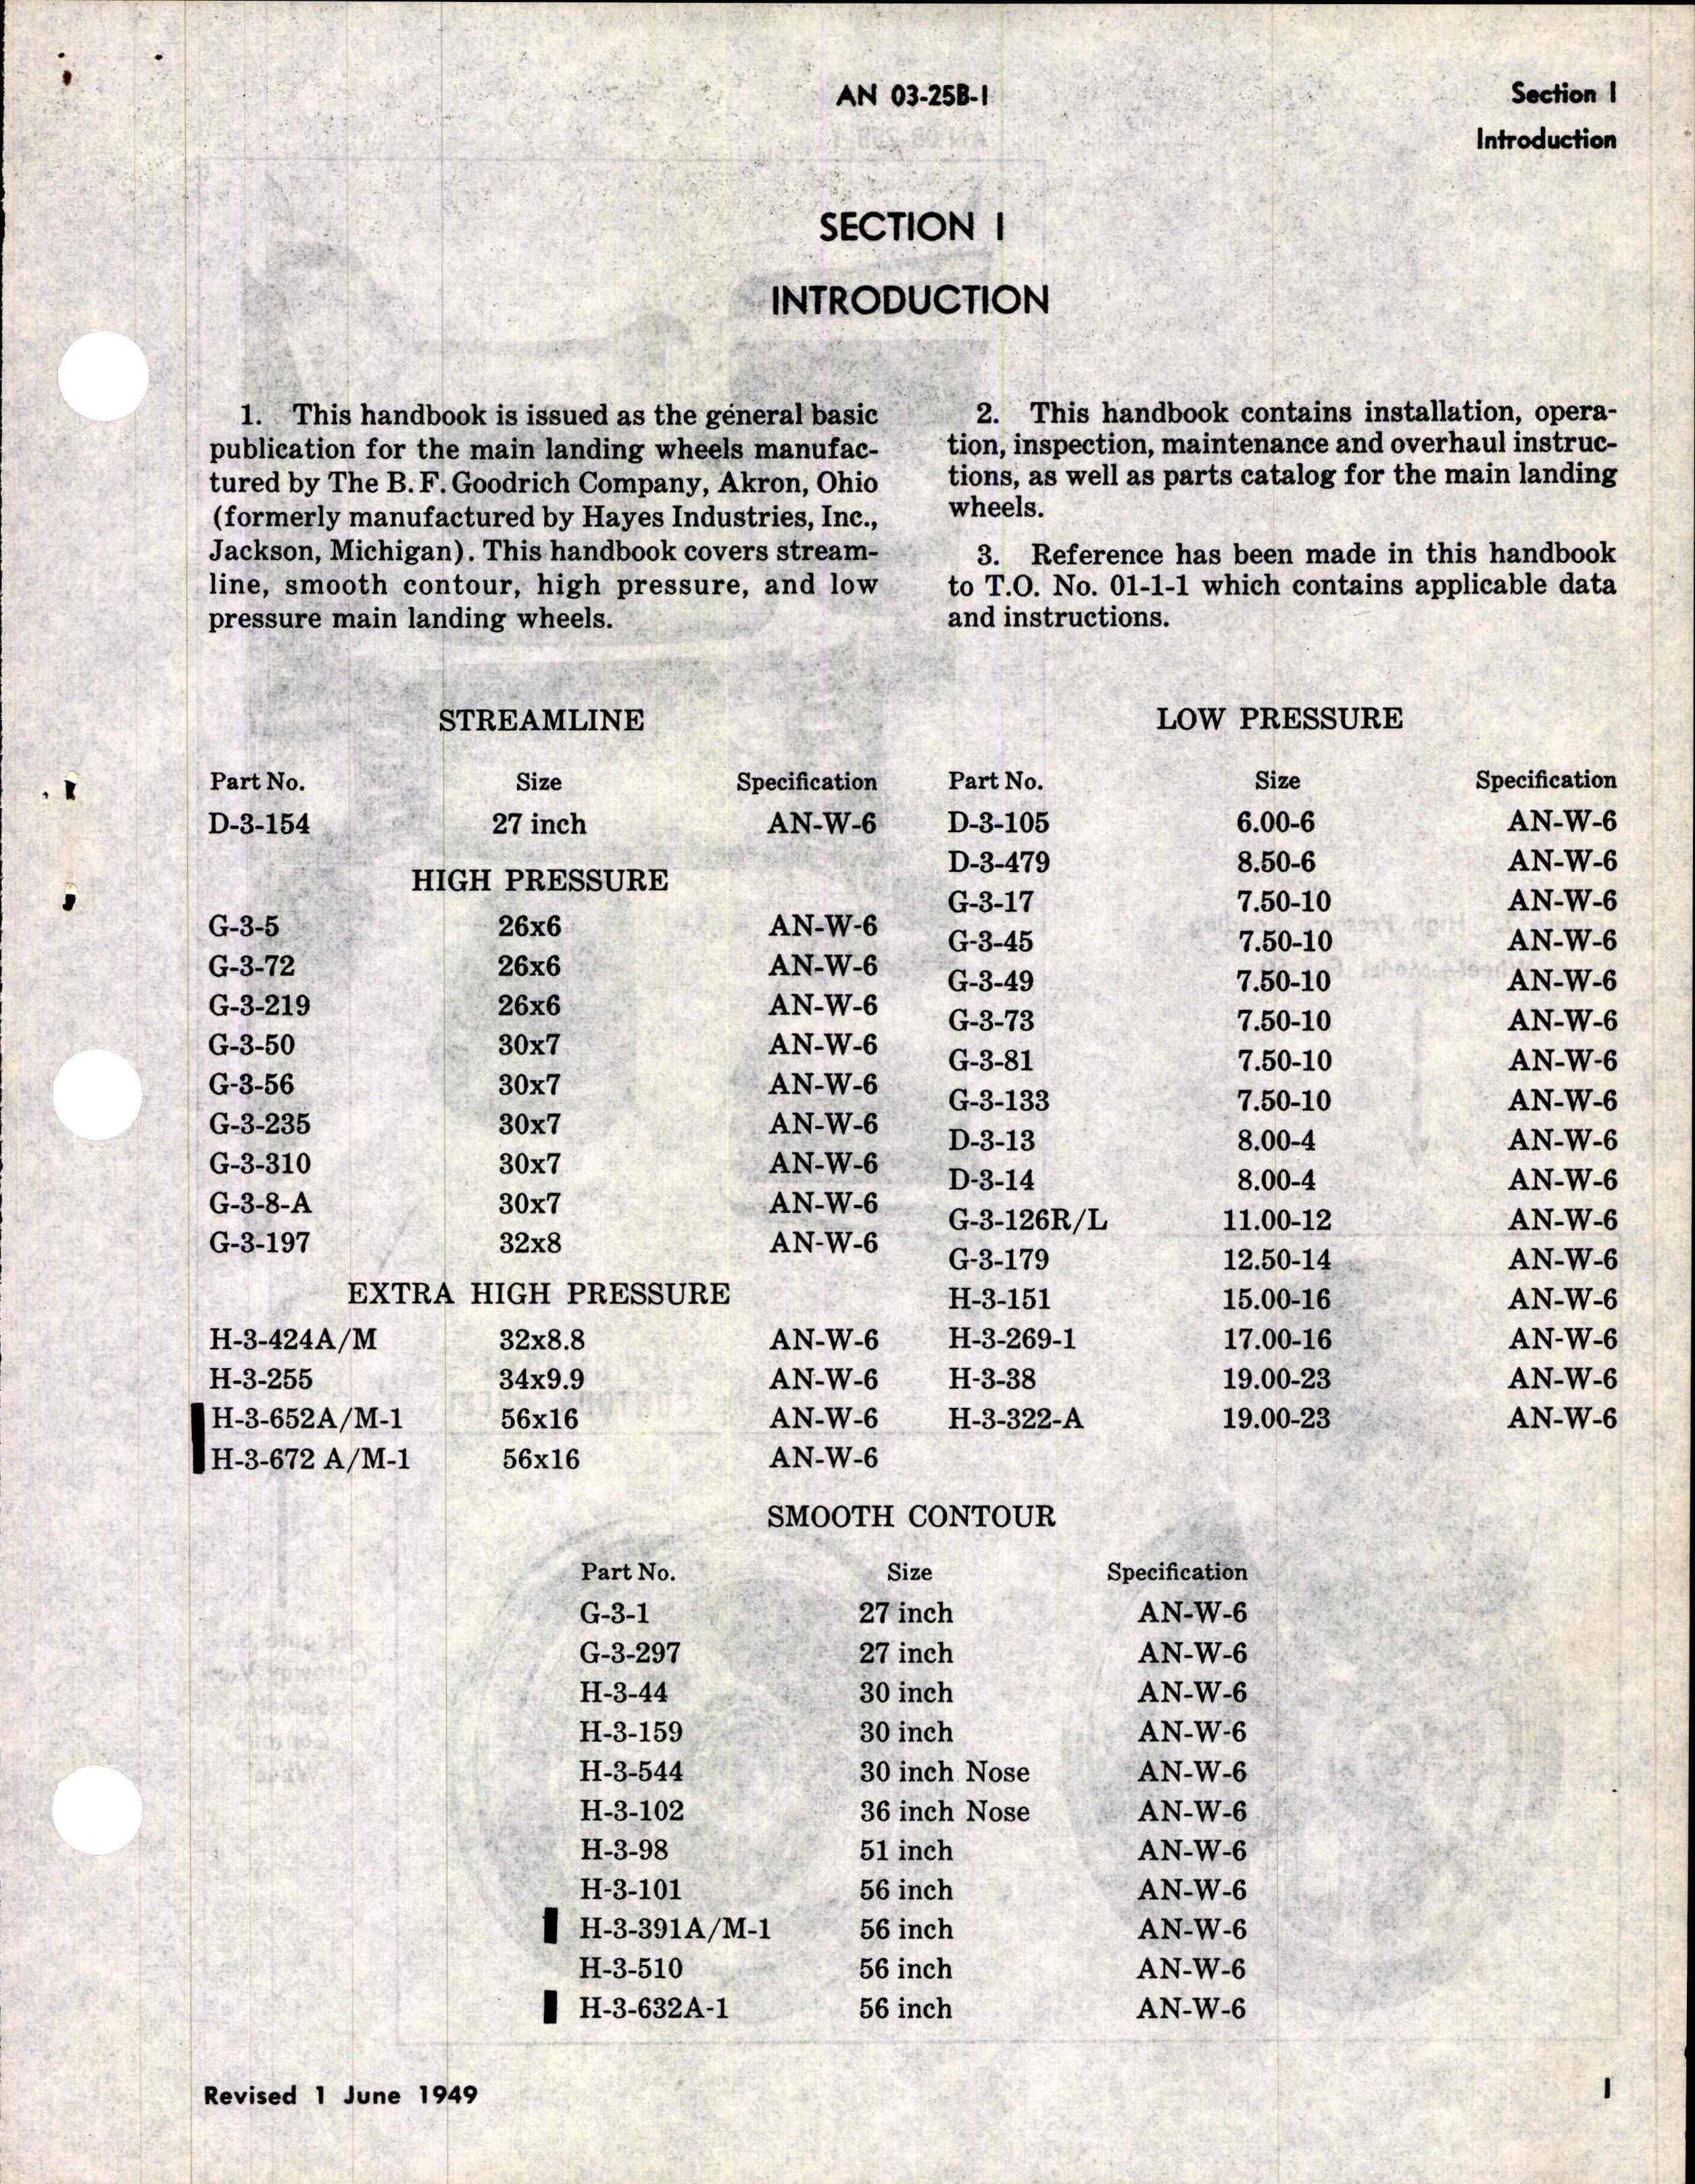 Sample page 3 from AirCorps Library document: Operation, Service, & Overhaul Instructions with Parts Catalog for Main Landing Wheels